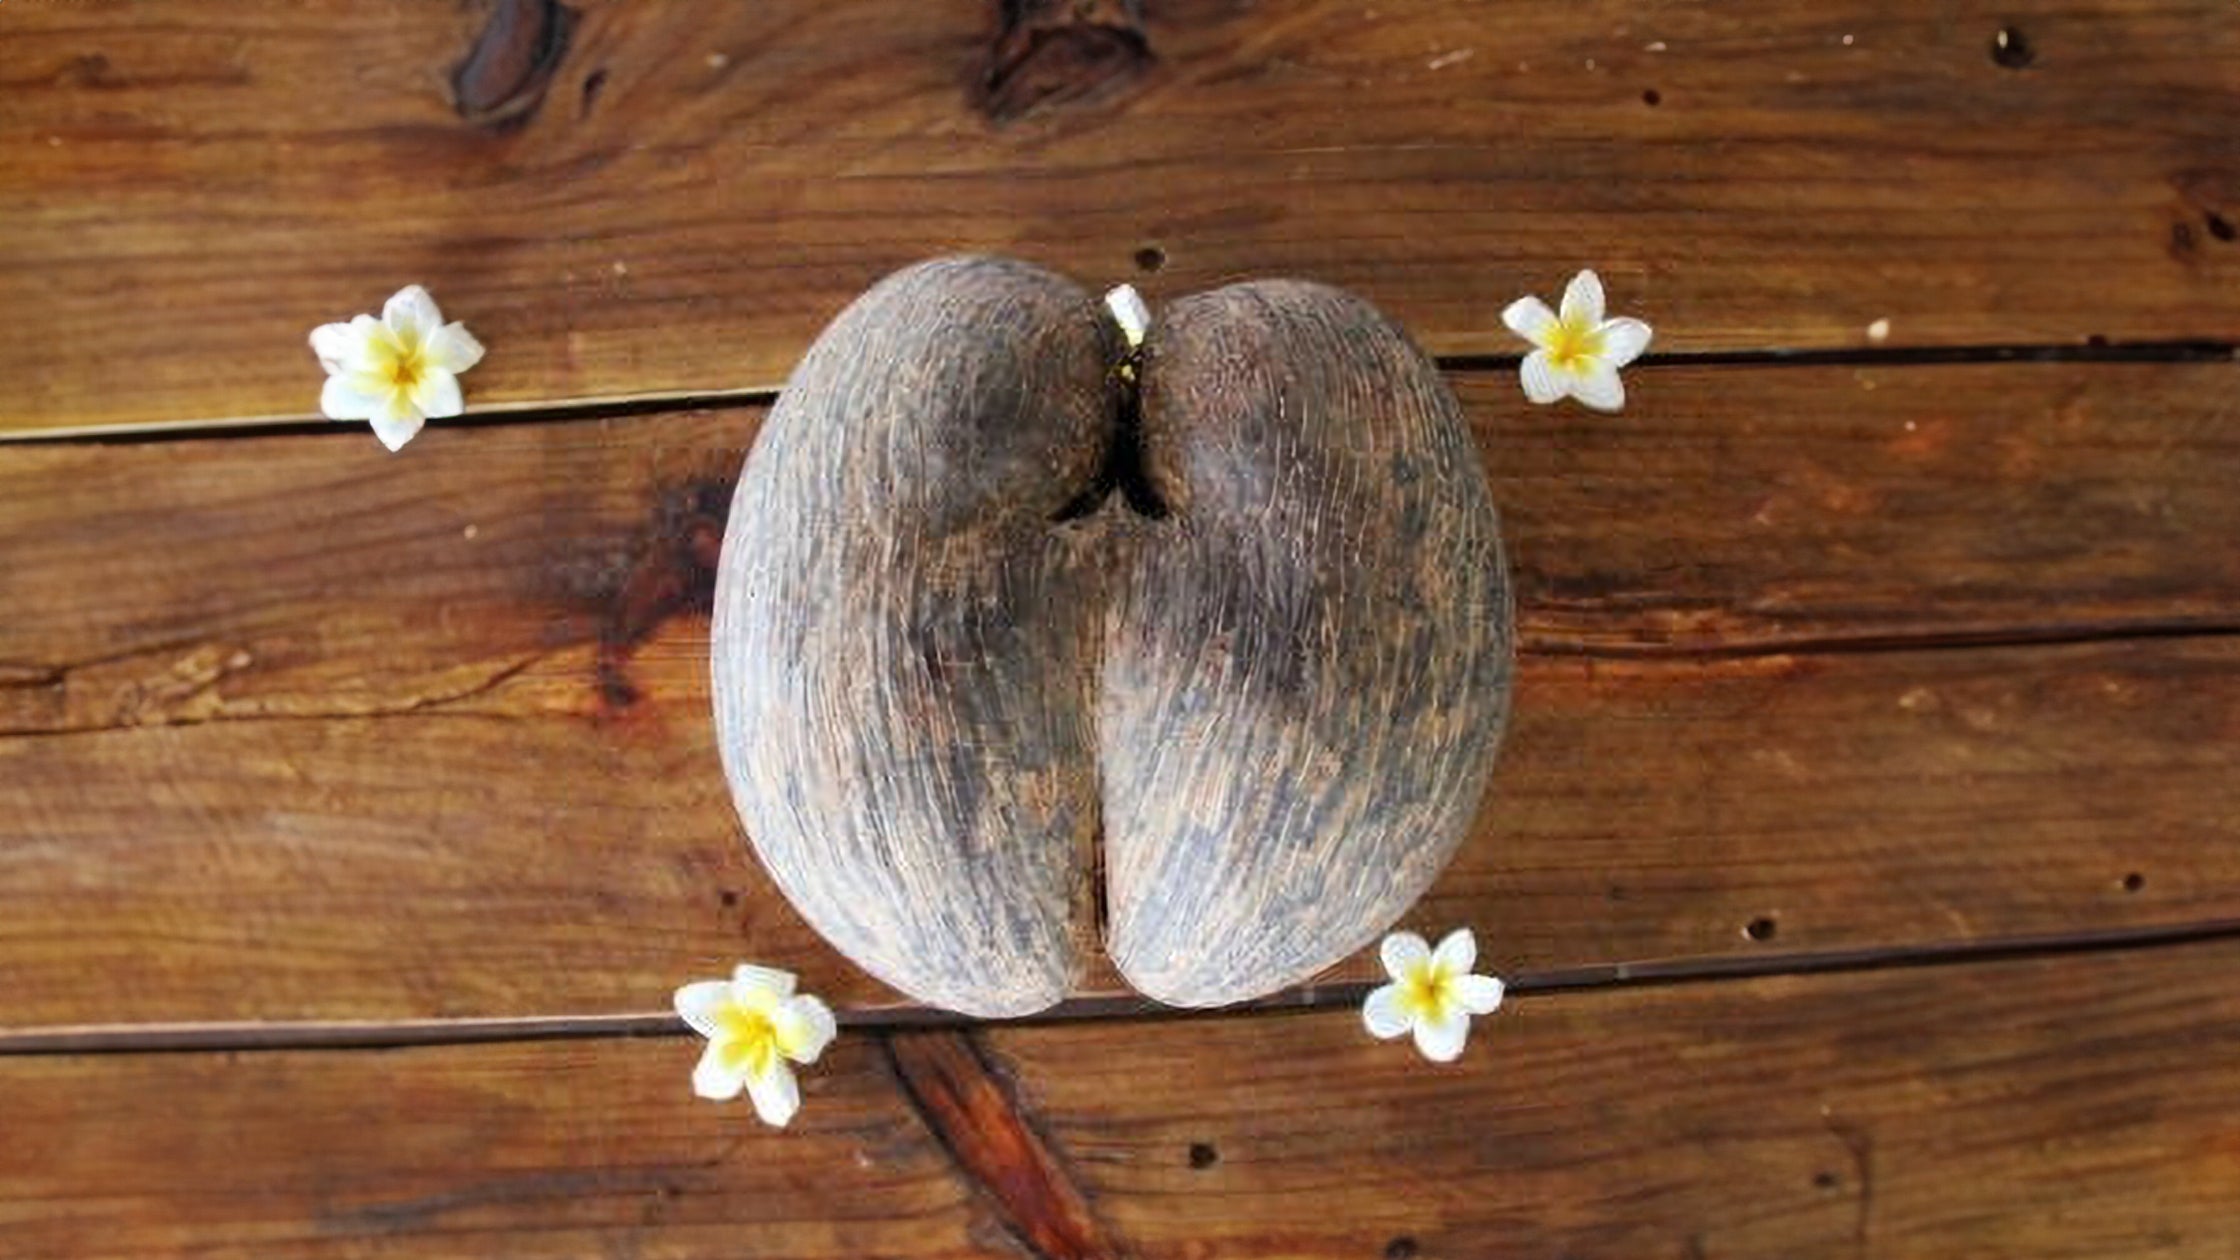 The World’s Largest Nut